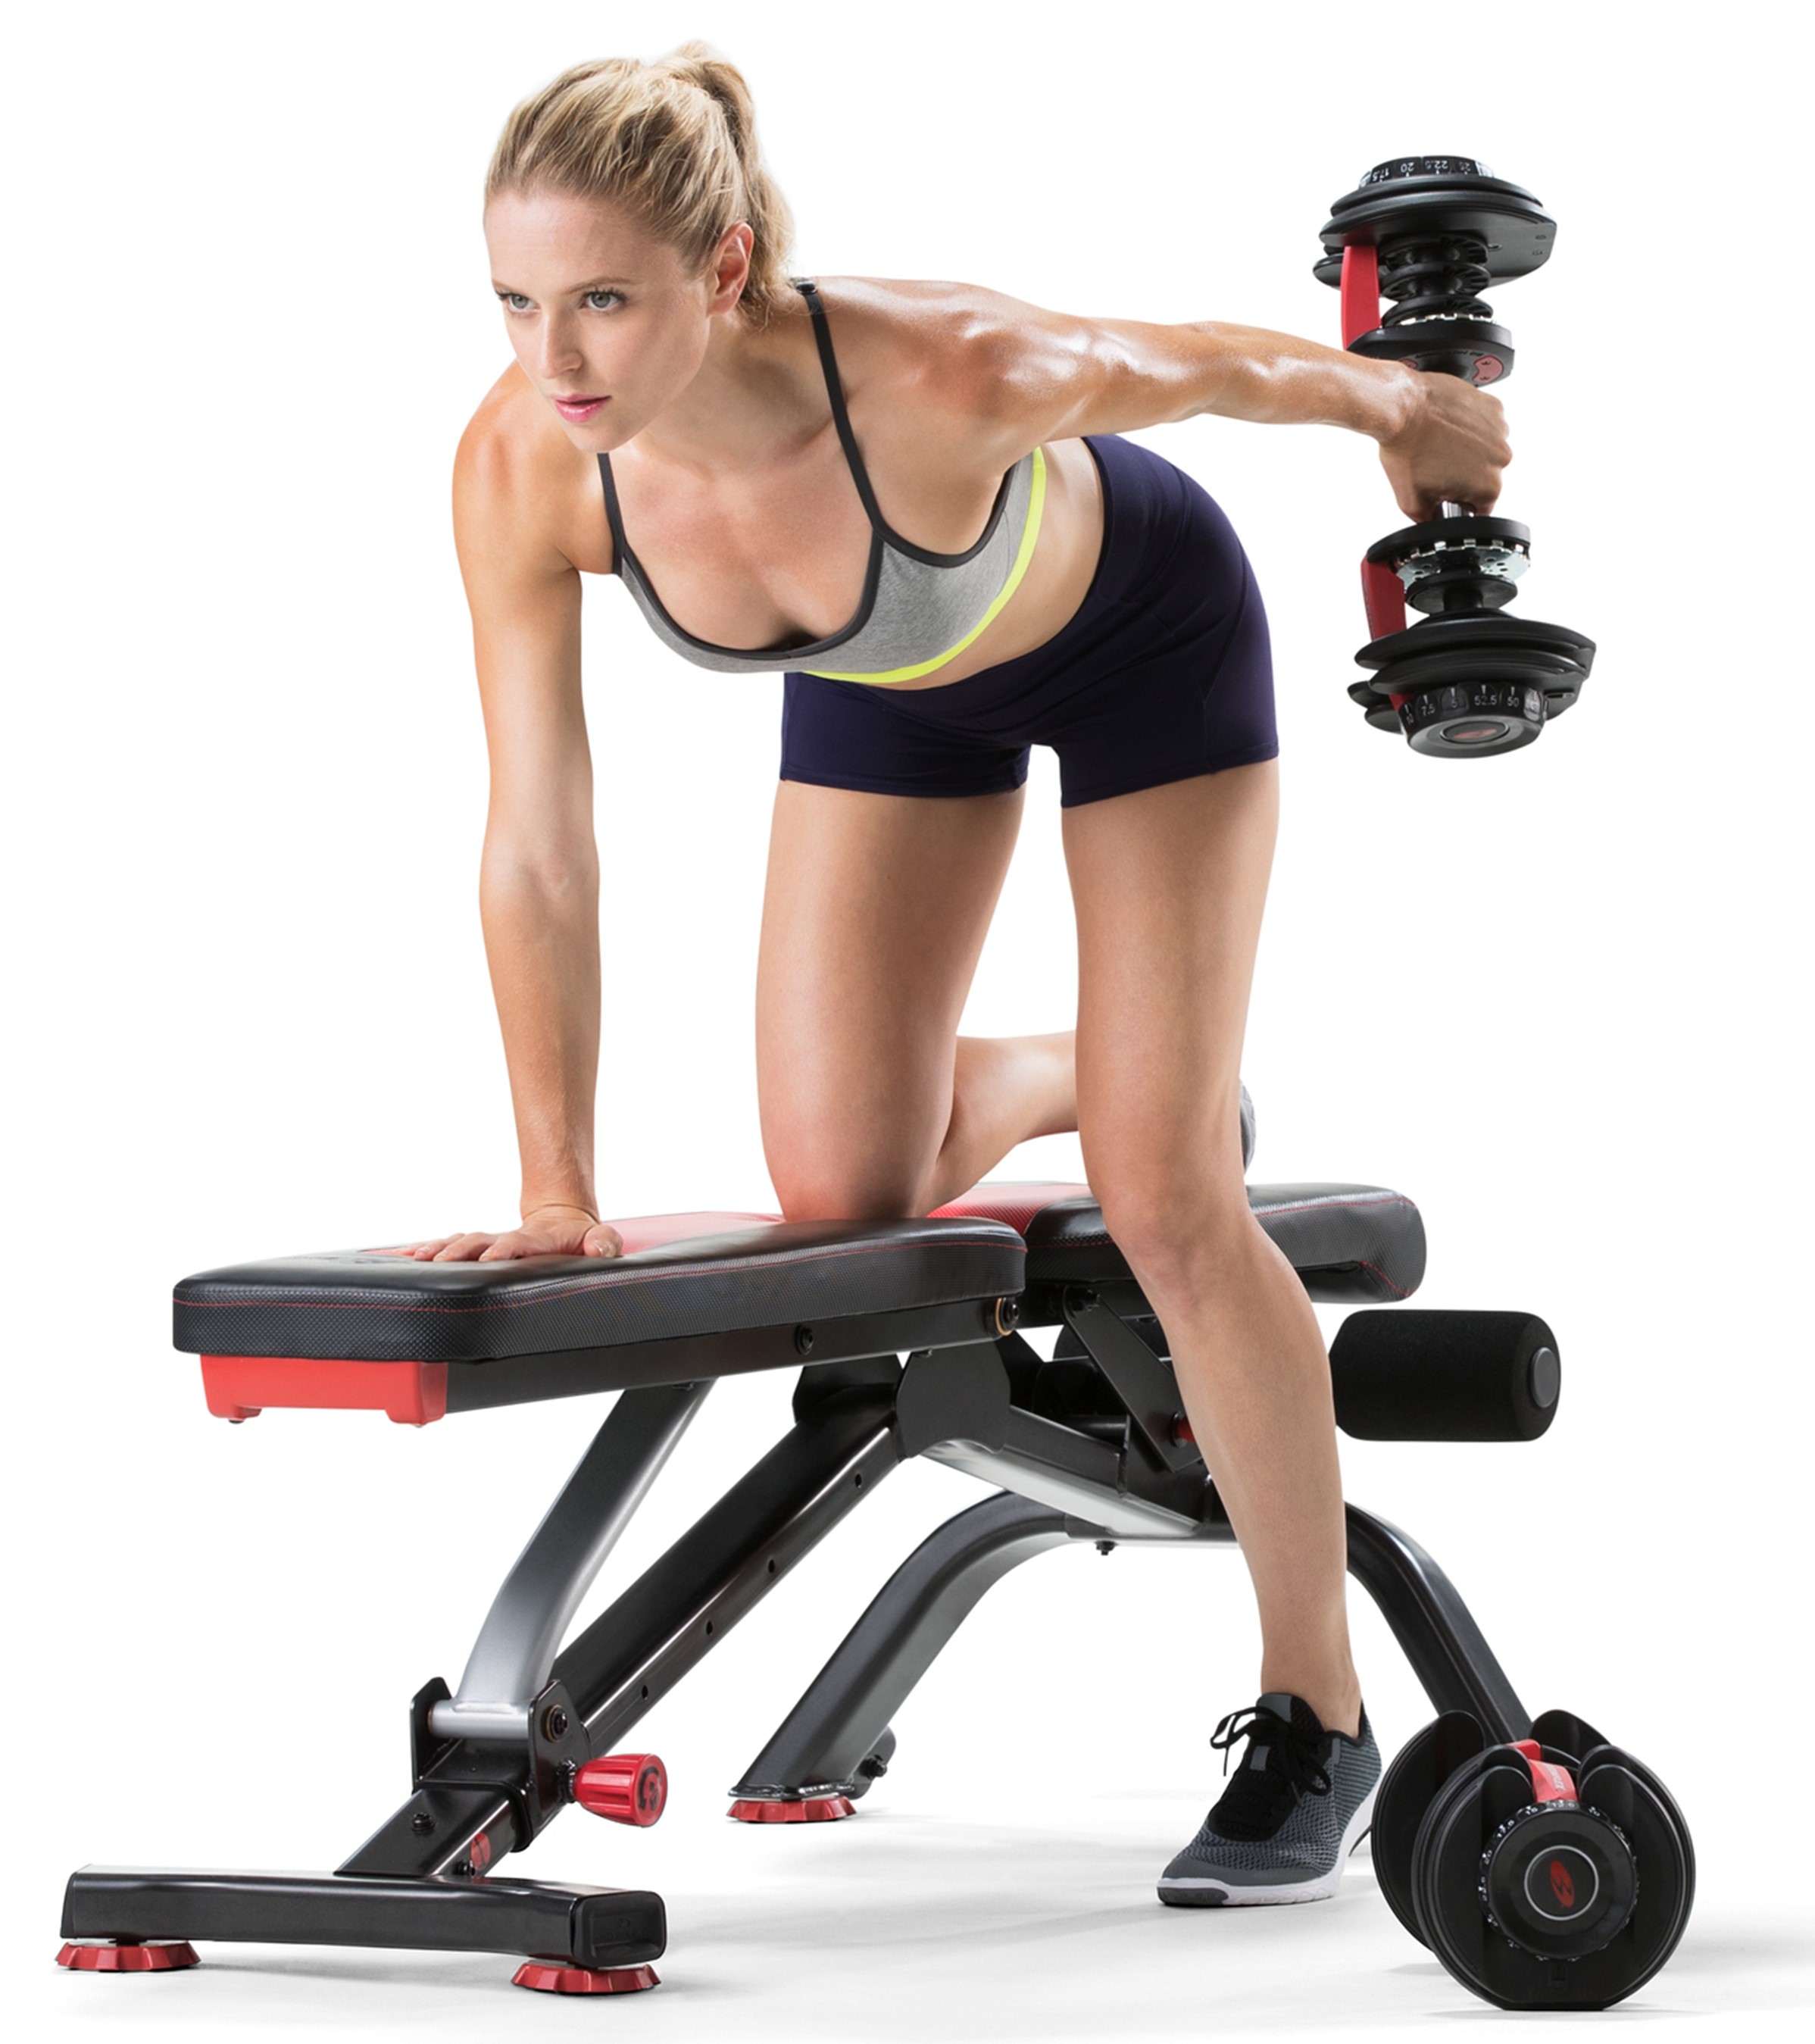 Bowflex 5.1S Stowable 6 Position Adjustable Bench - image 5 of 9